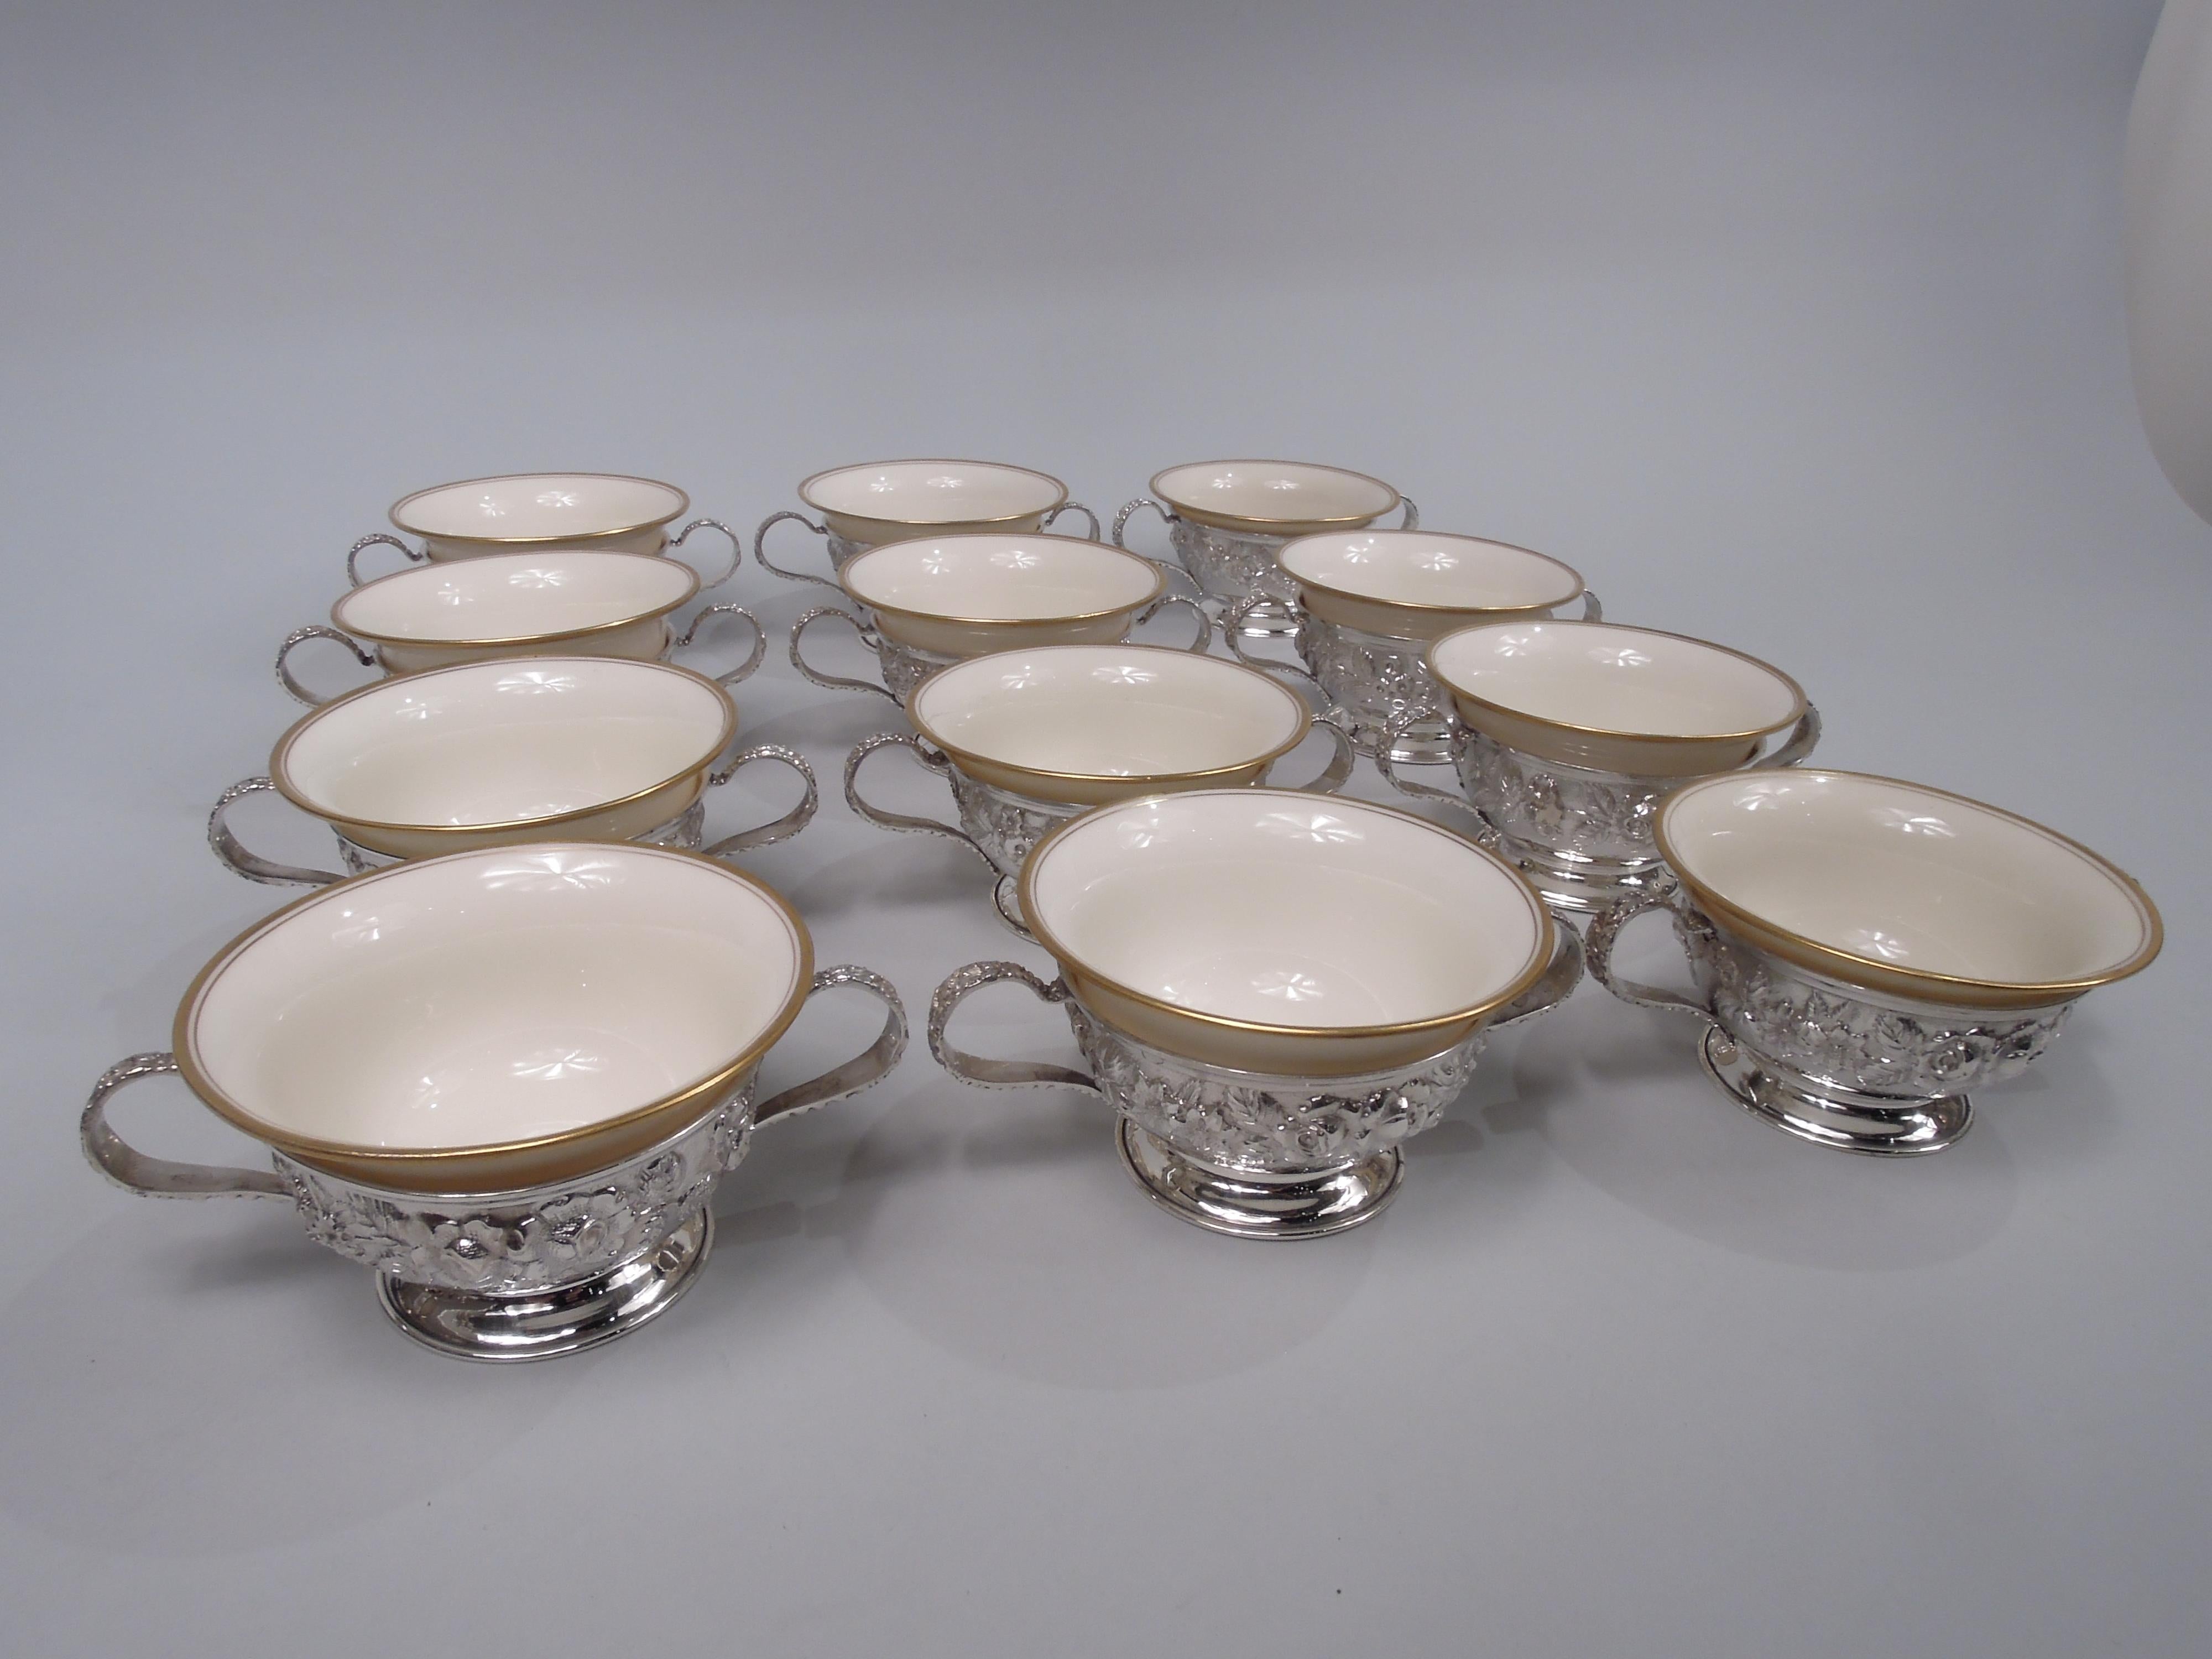 Set of 12 Edwardian sterling silver holders. Made by Schofield in Baltimore, ca 1910. Each: Round and curved bowl with floral repousse; open bottom and plain spread foot. High-looping side handles with case repousse-style floral ornament. With: